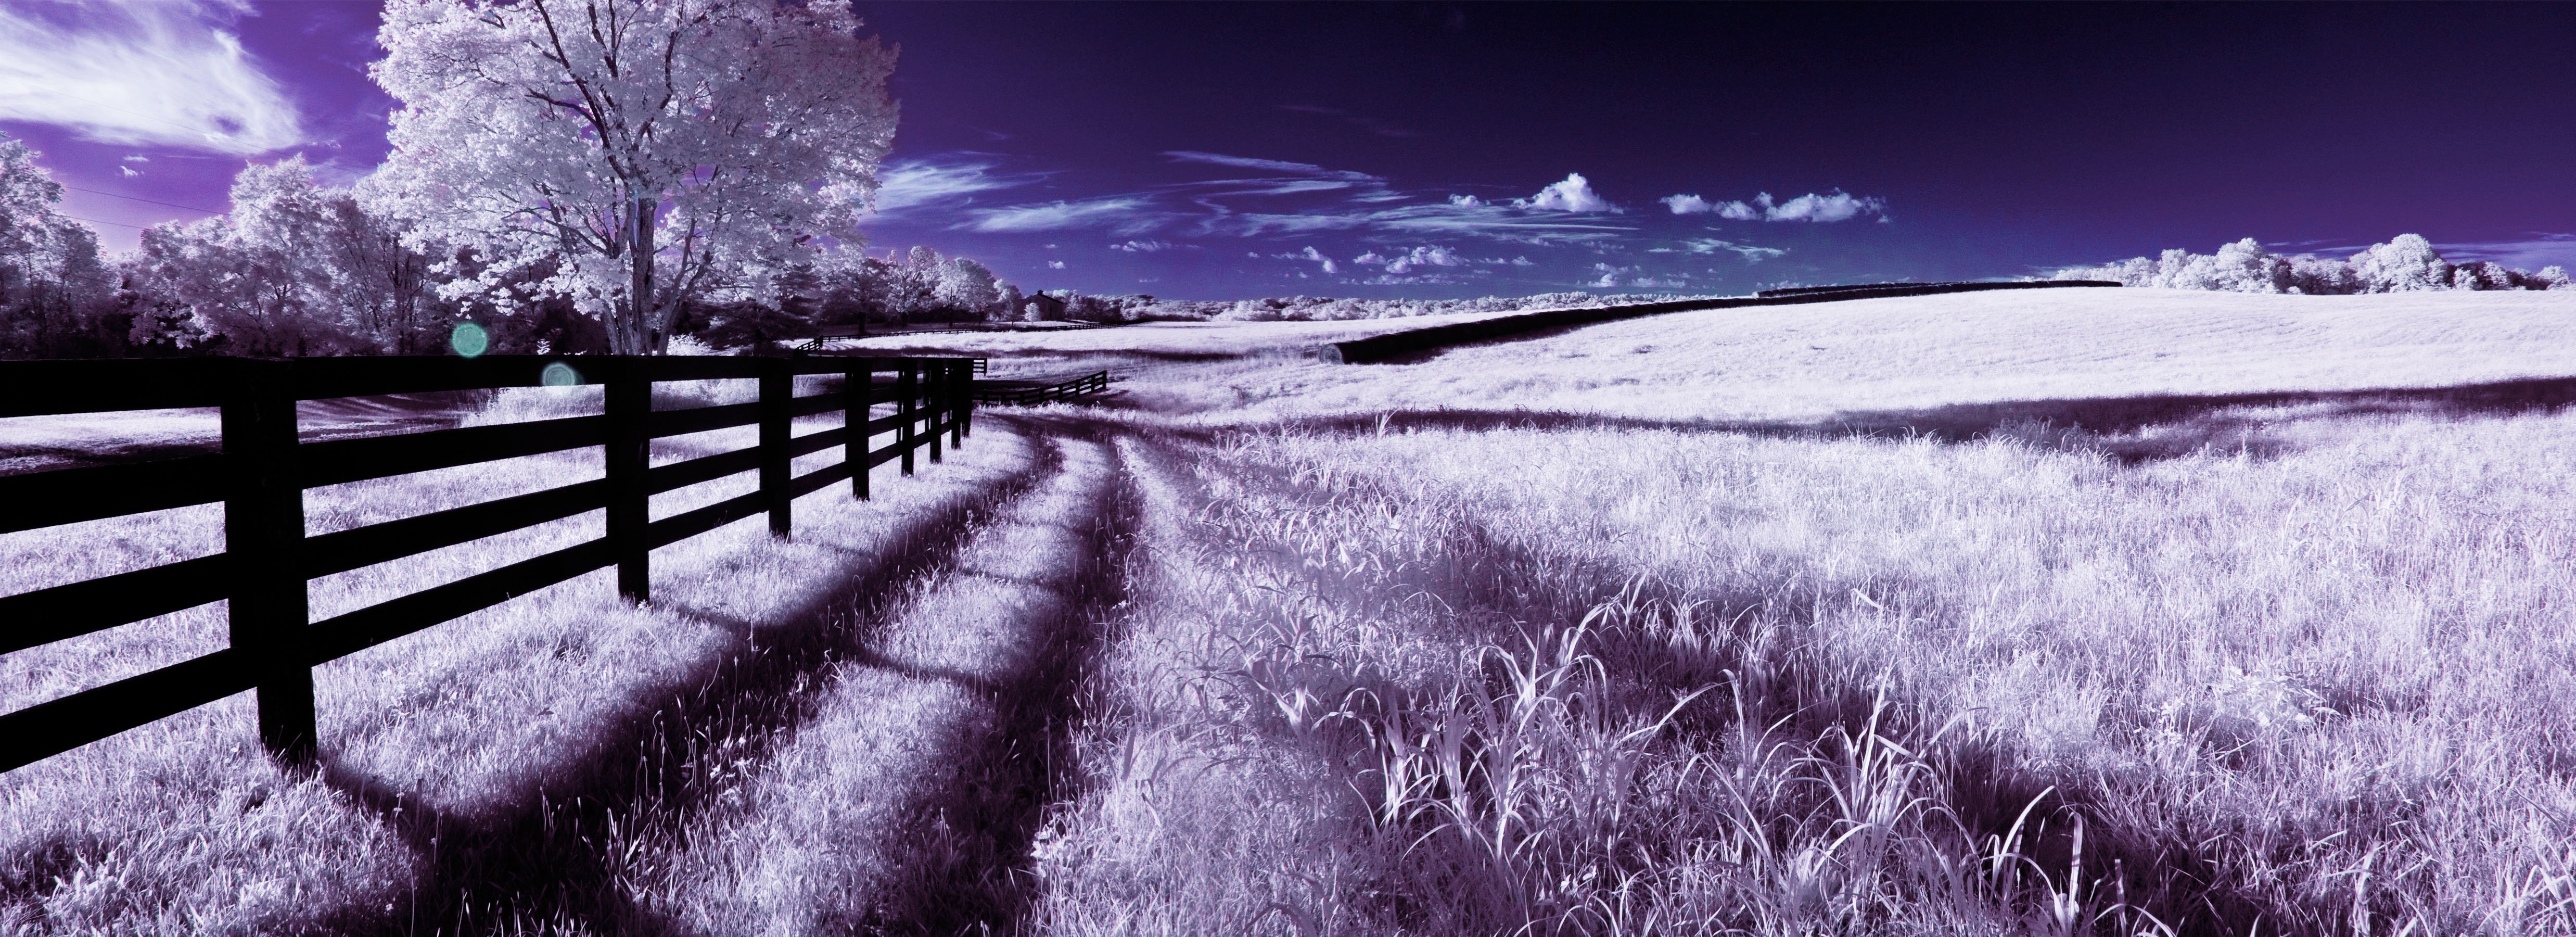 Photography Infrared 4950x1800